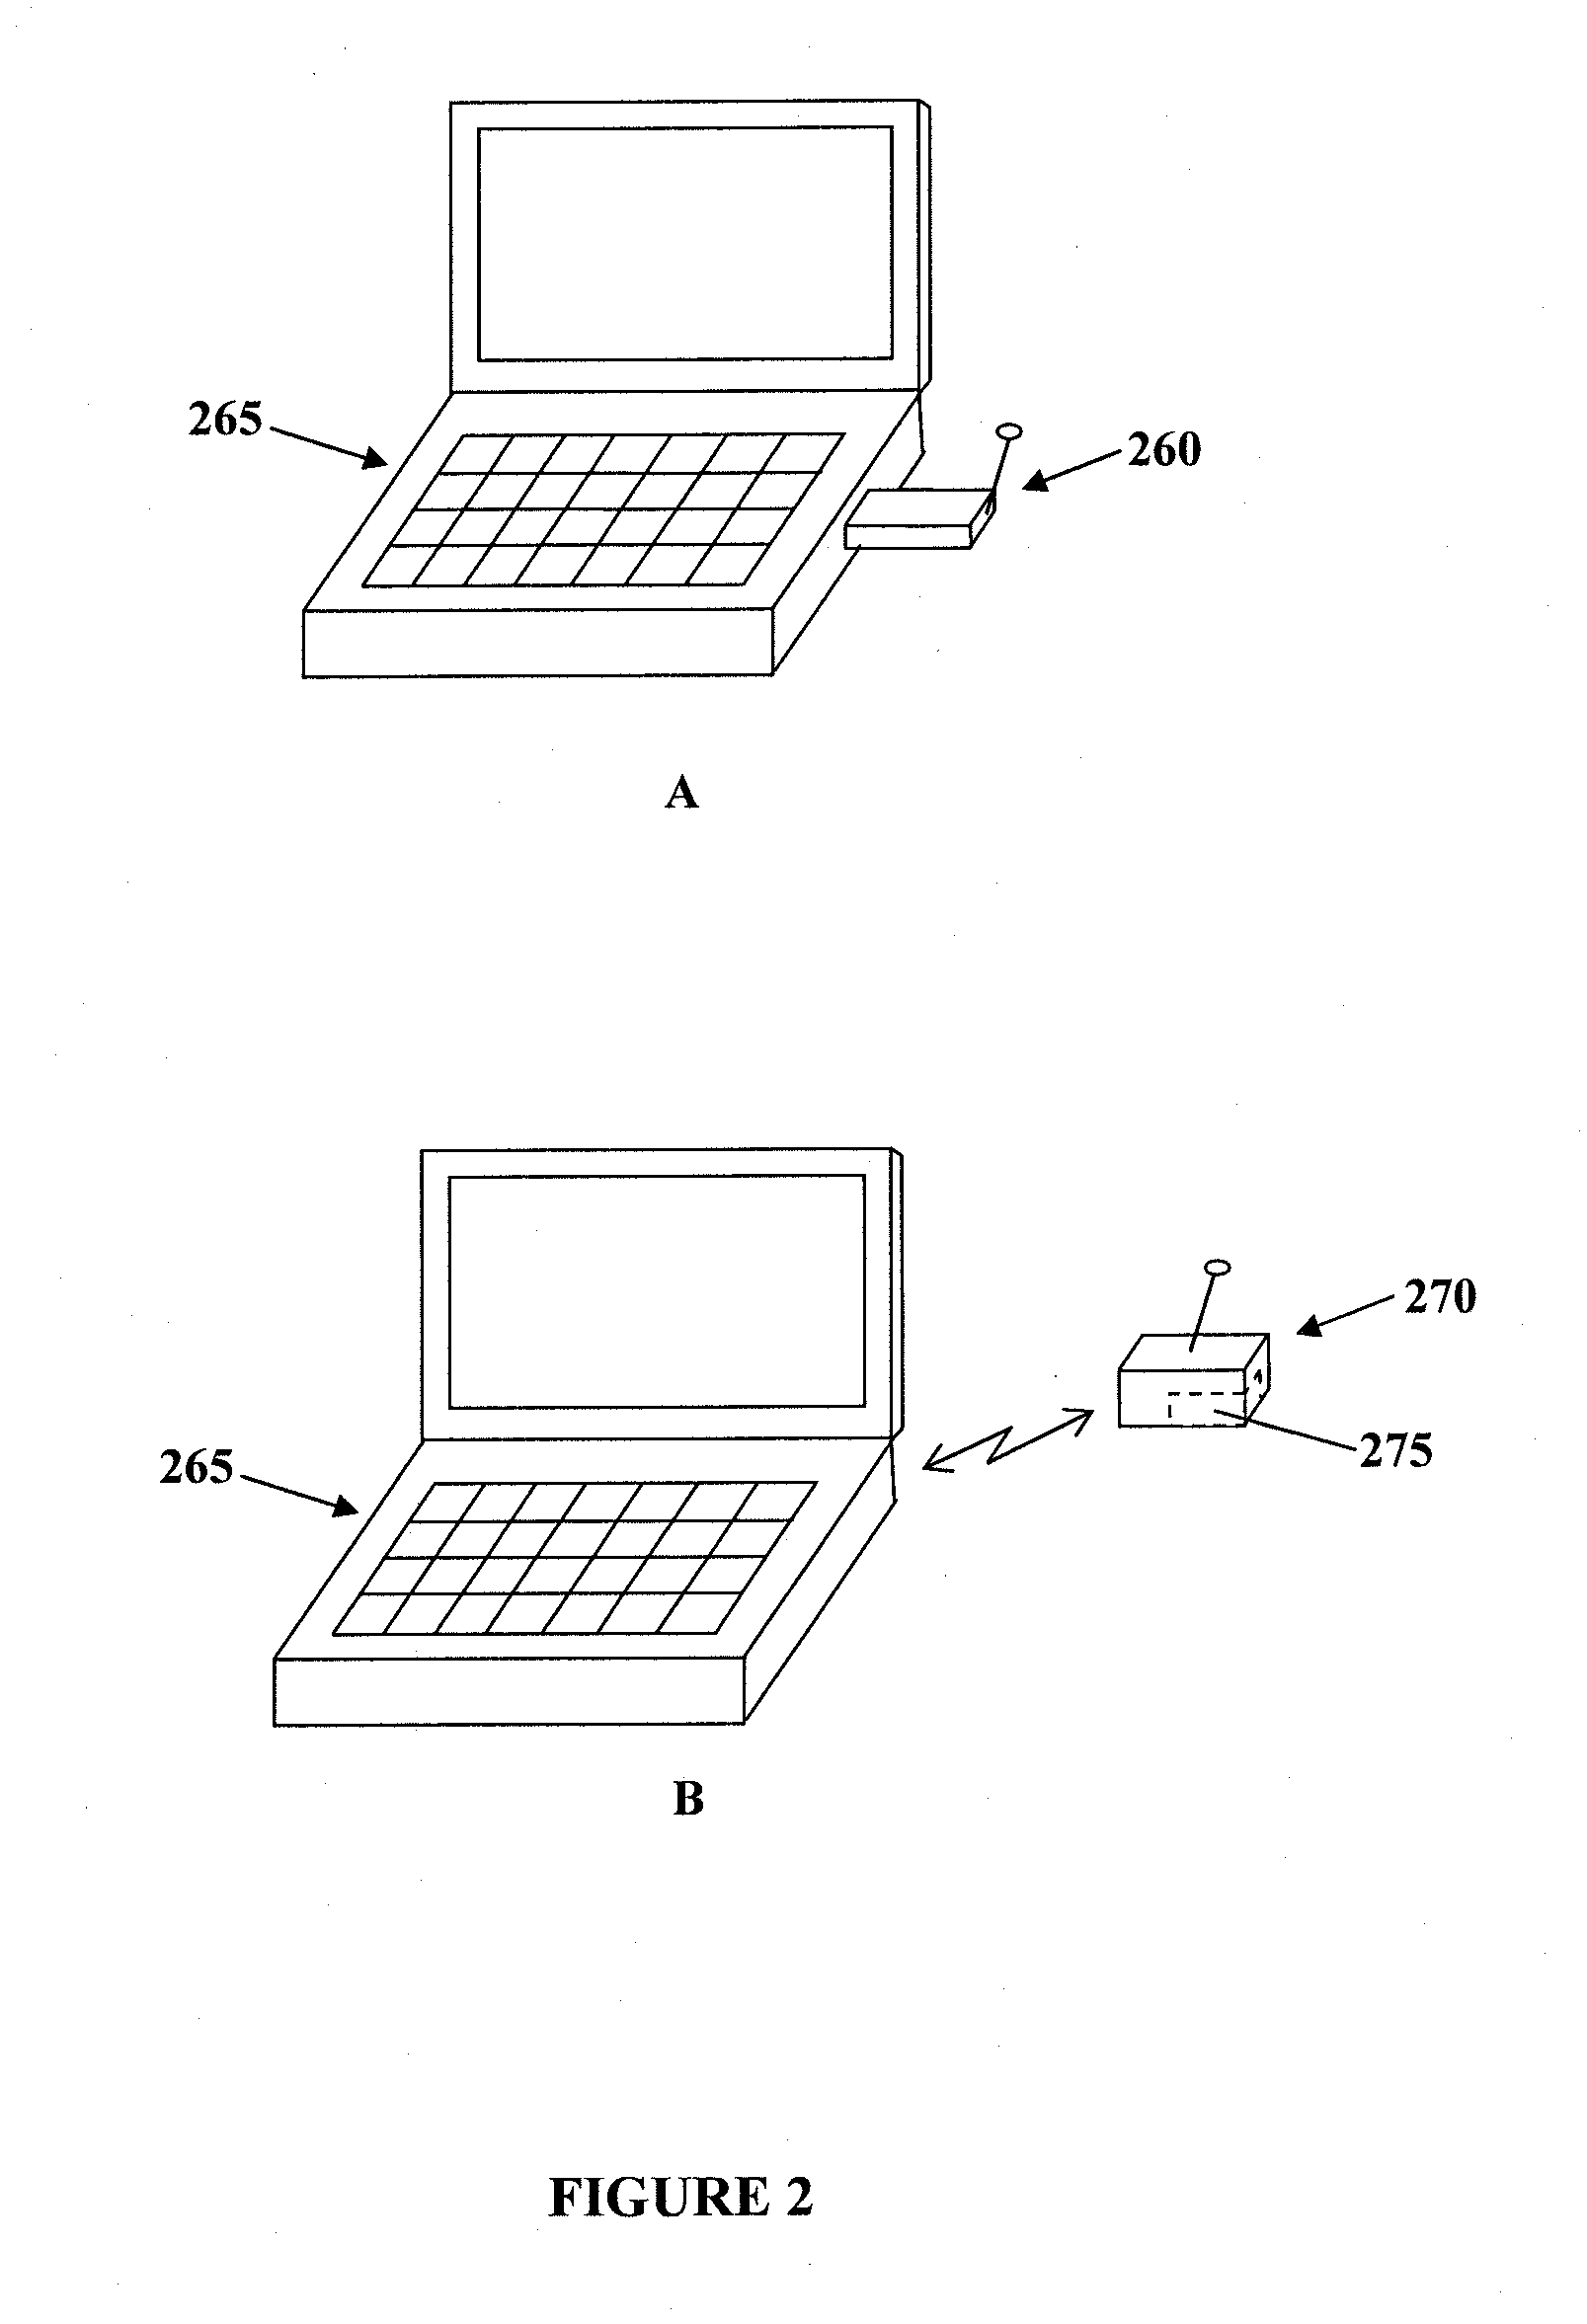 Apparatus providing plural wireless transceivers within a desired power budget and associated method